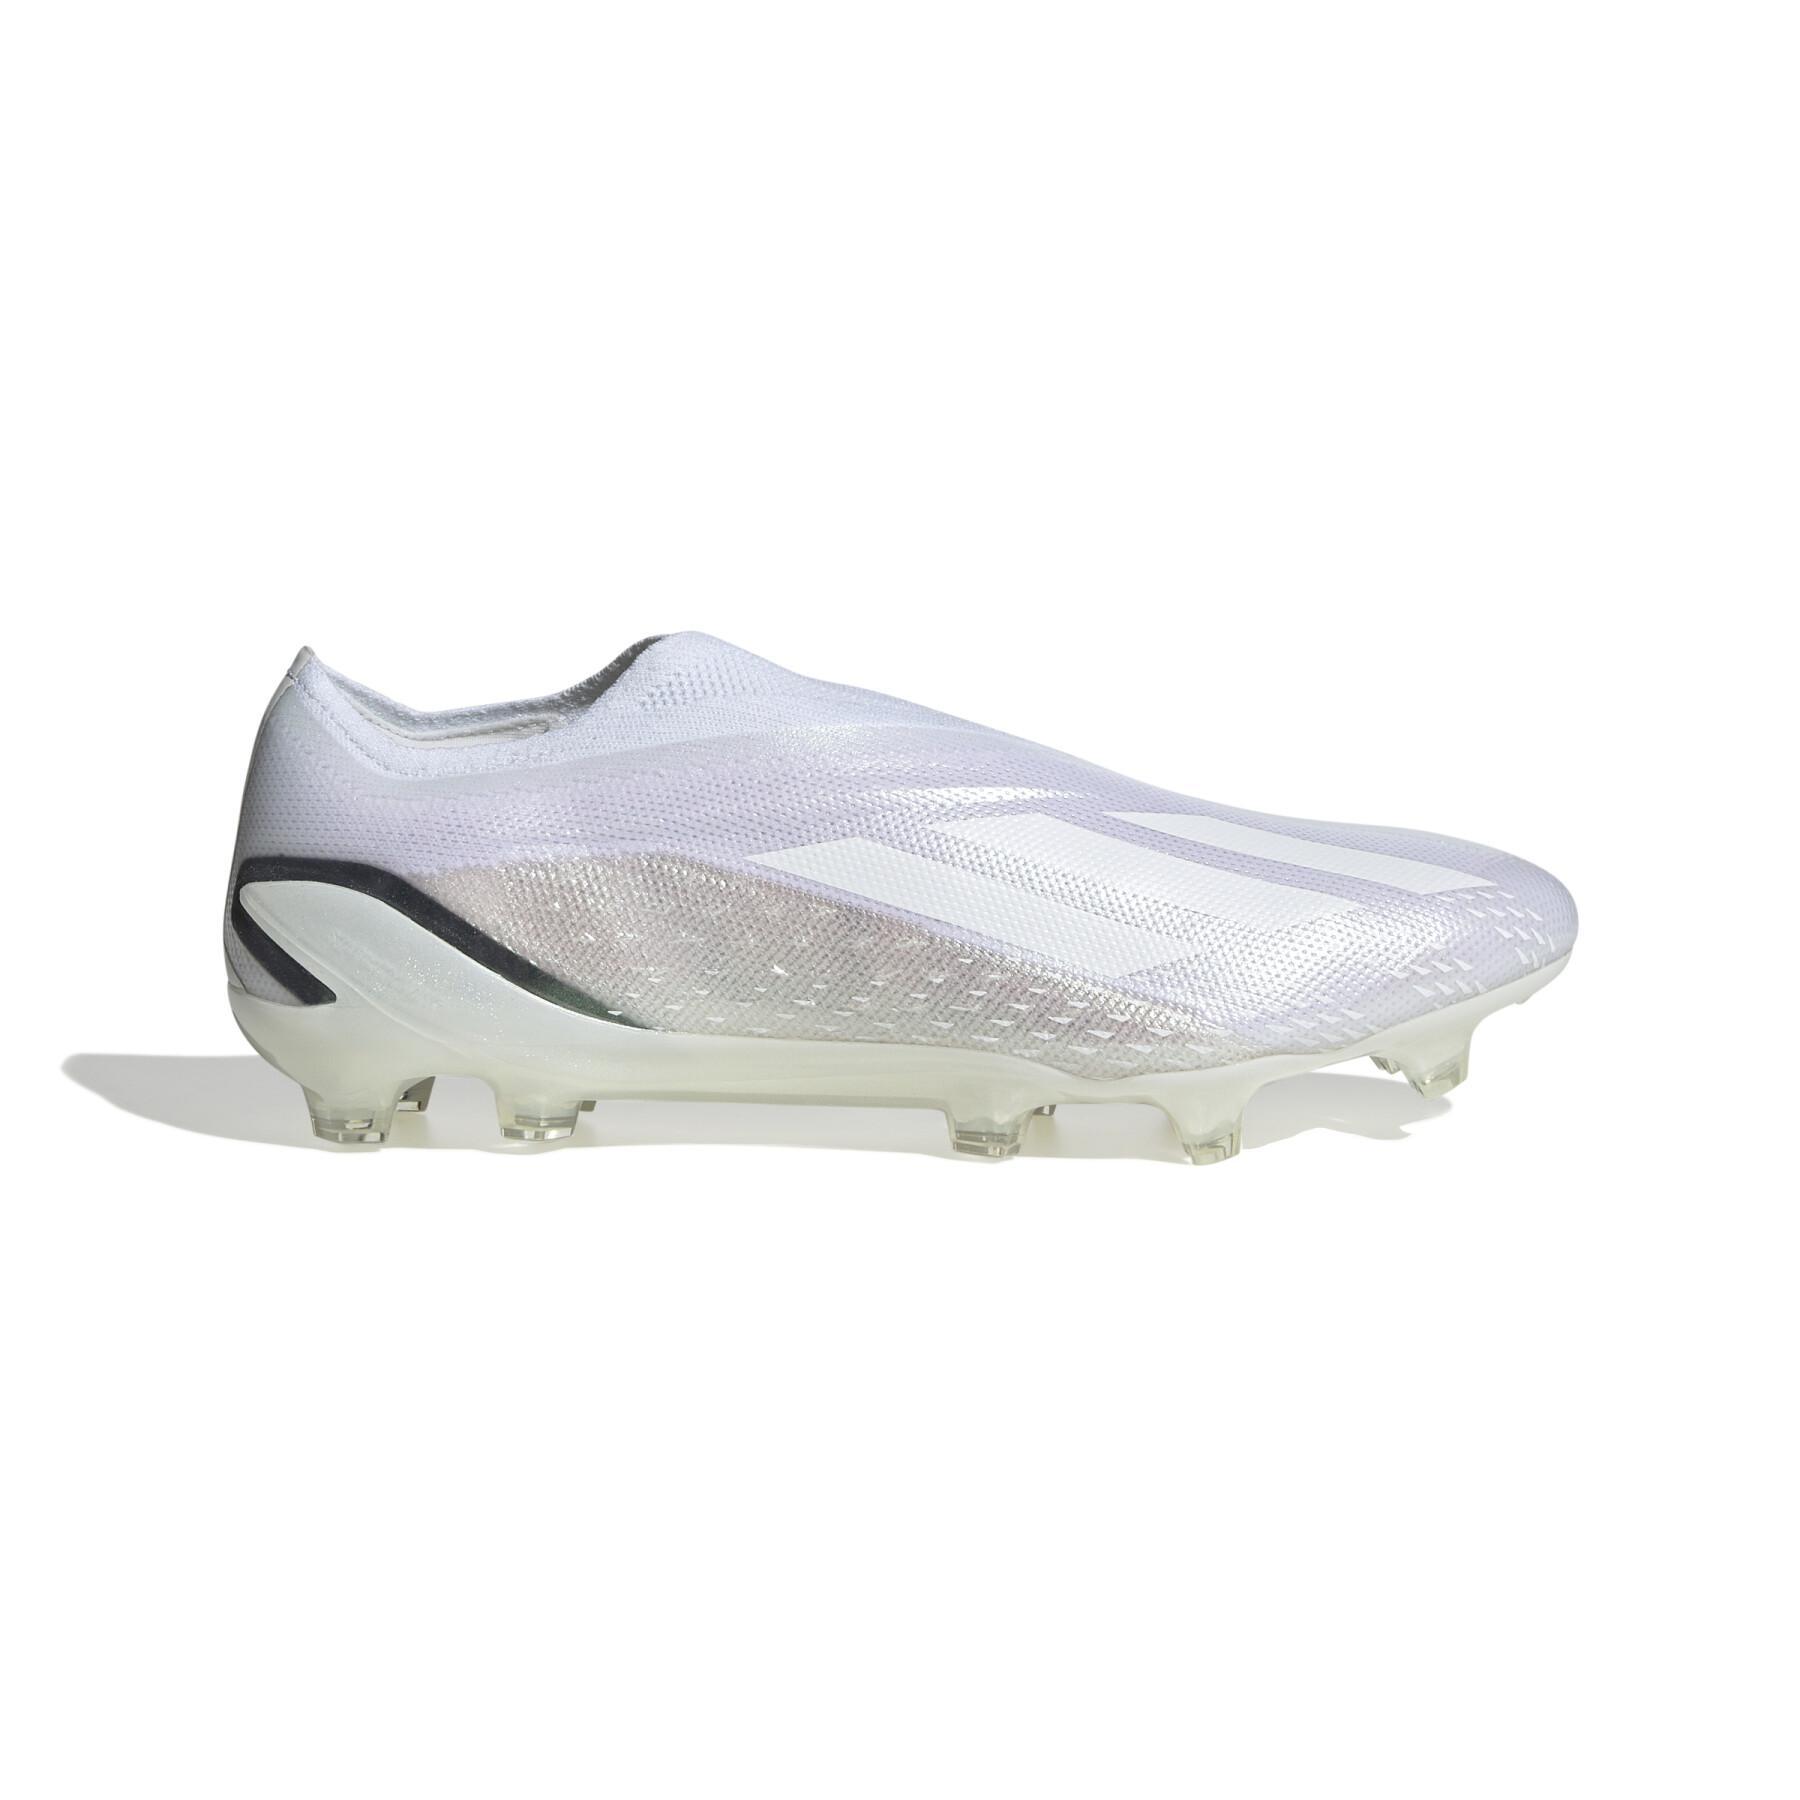 Soccer shoes adidas X Speedportal+ FG - Pearlized Pack